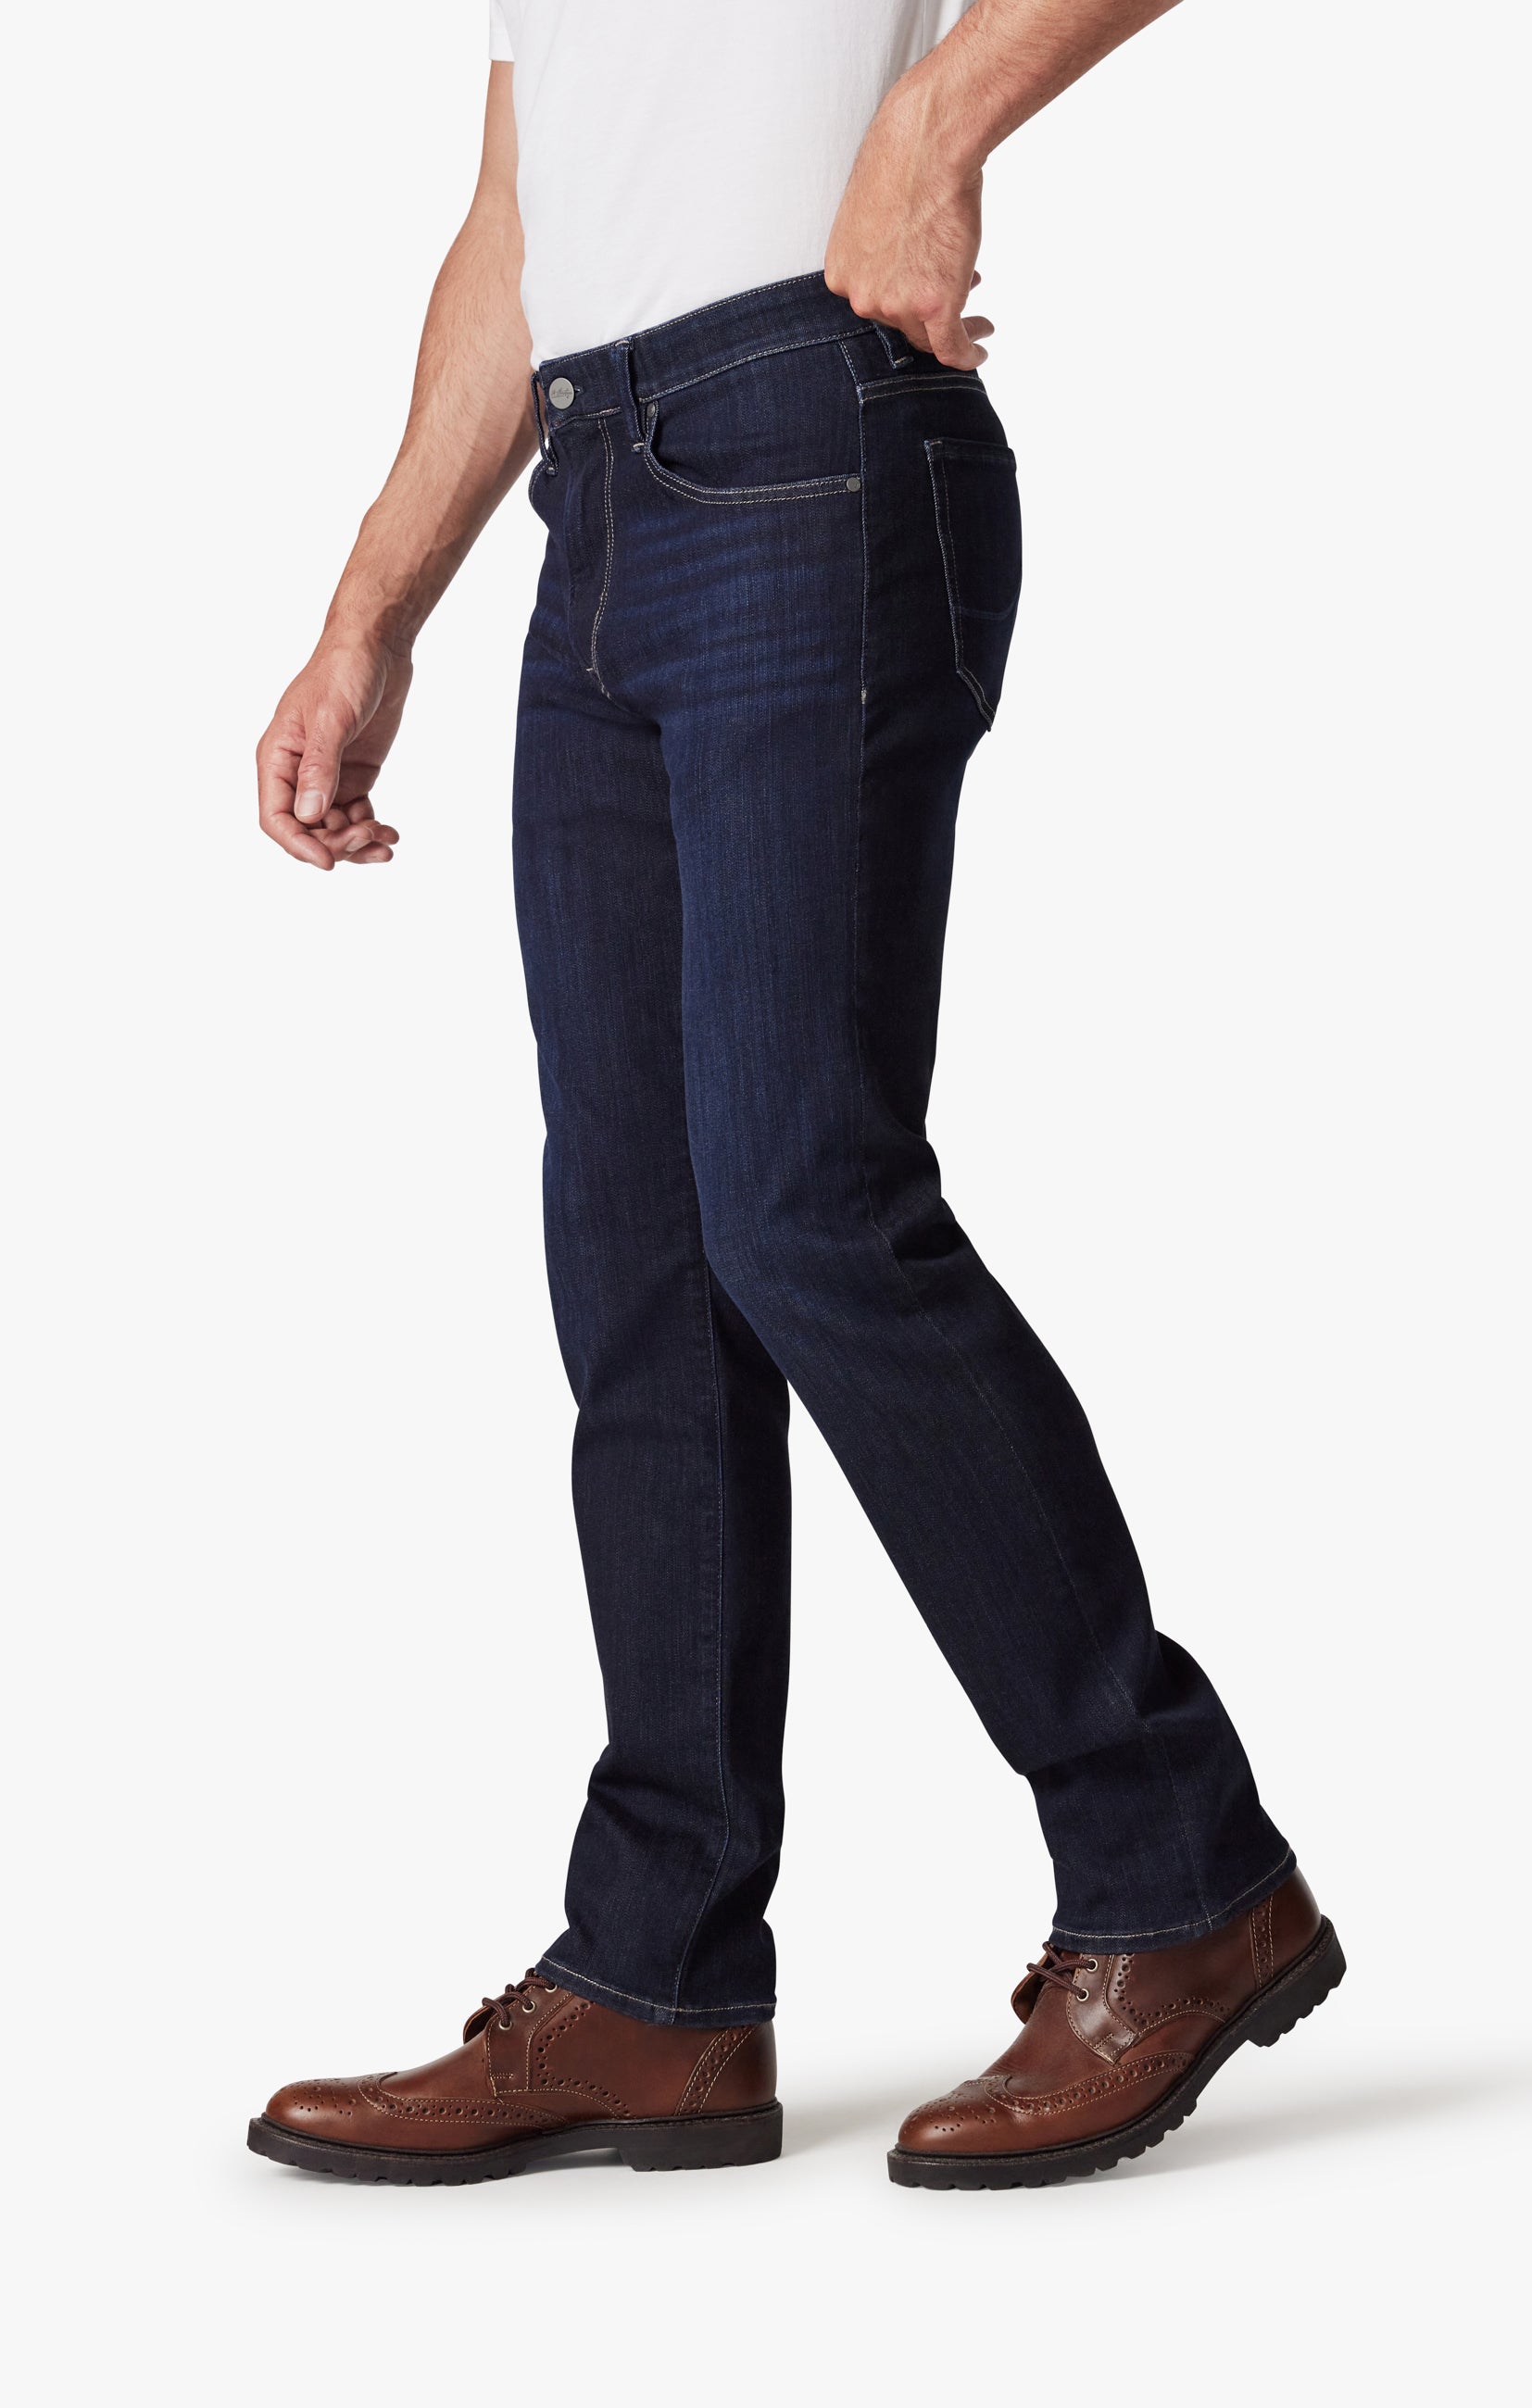 34 Heritage Men's Champ Athletic Fit Jeans in Deep Refined